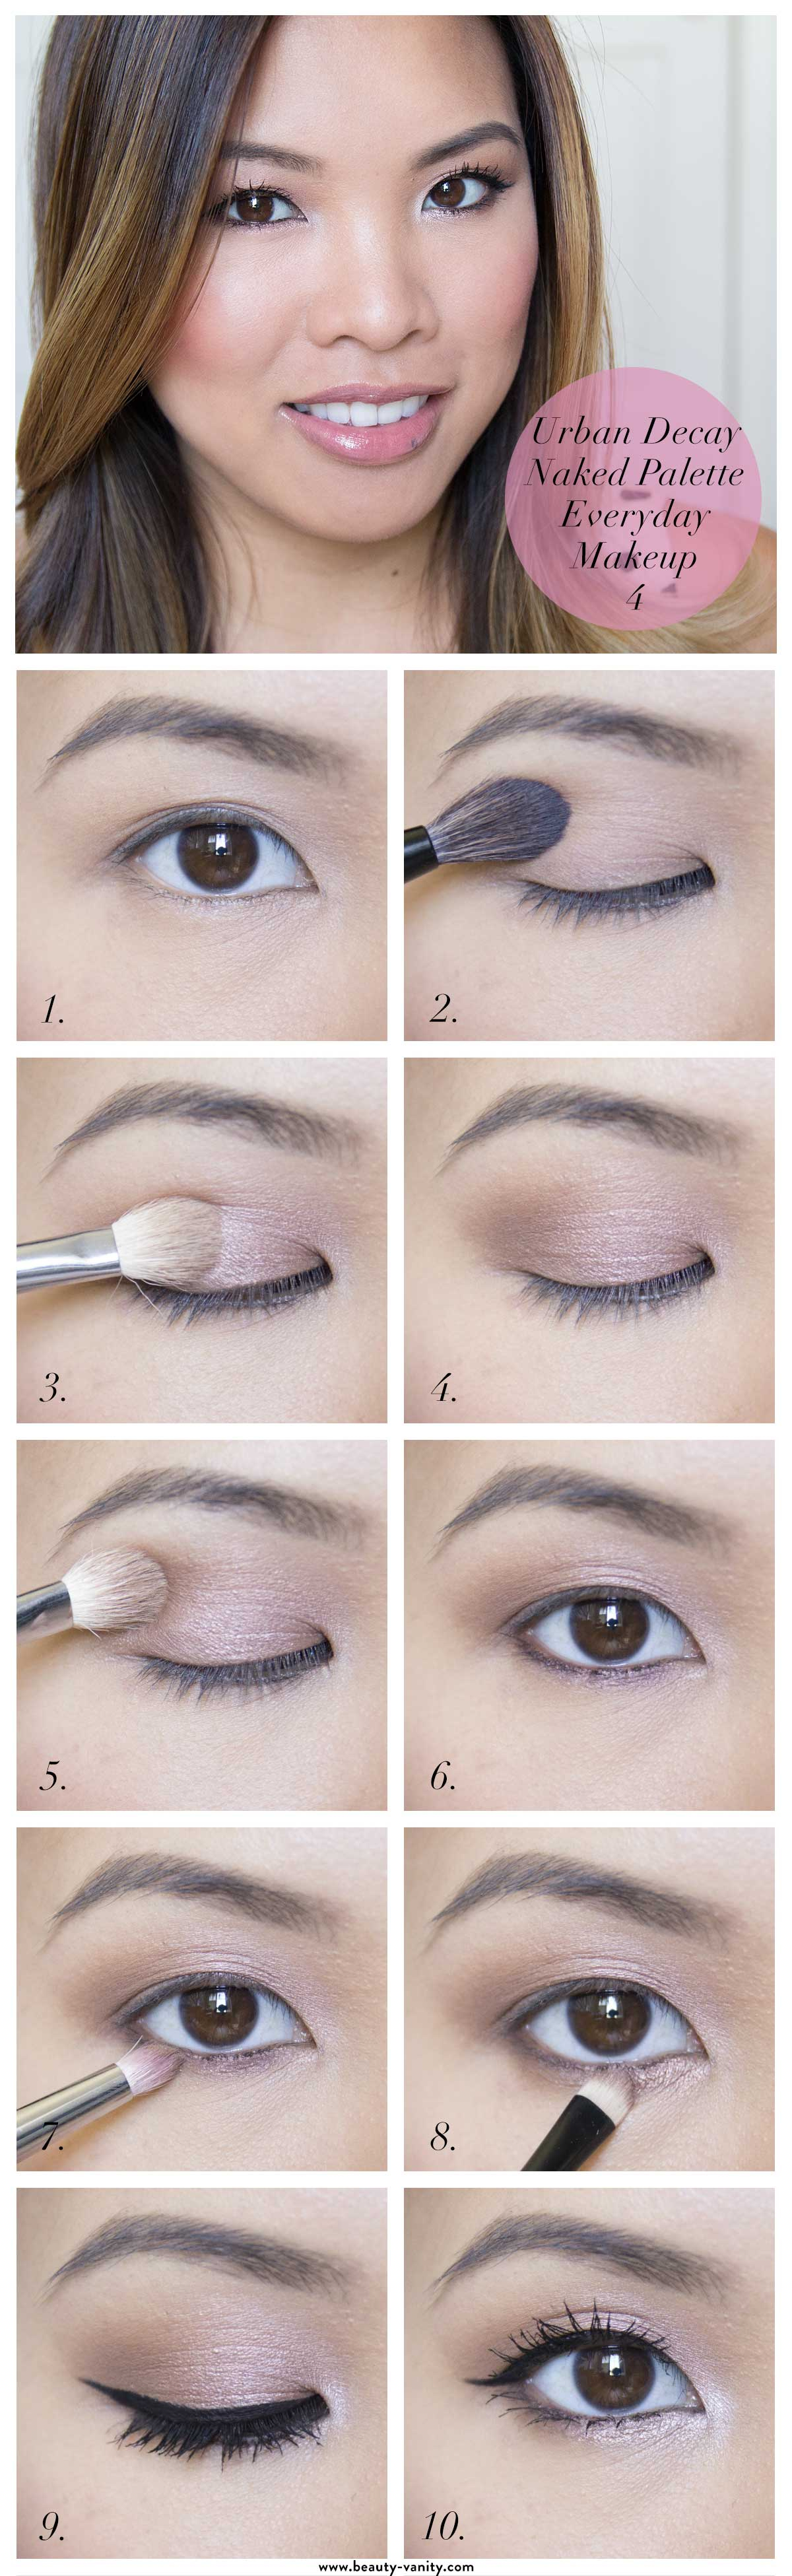 Nude Eye Makeup Tutorial Quick And Easy Polished Makeup For Spring